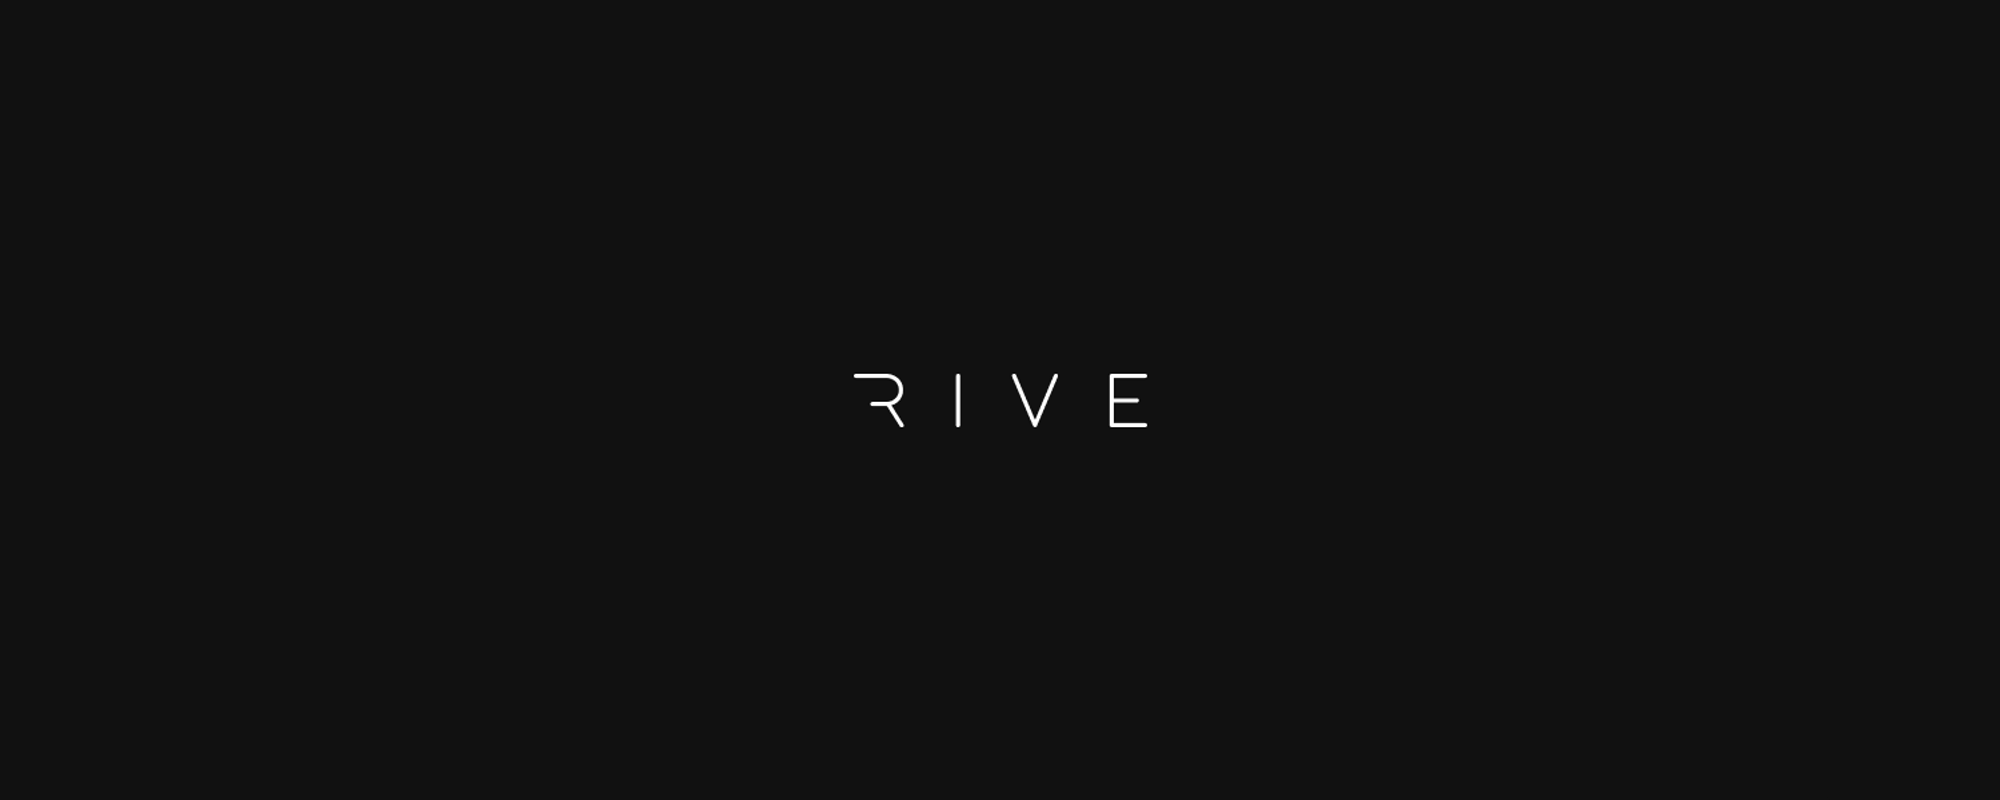 rive android